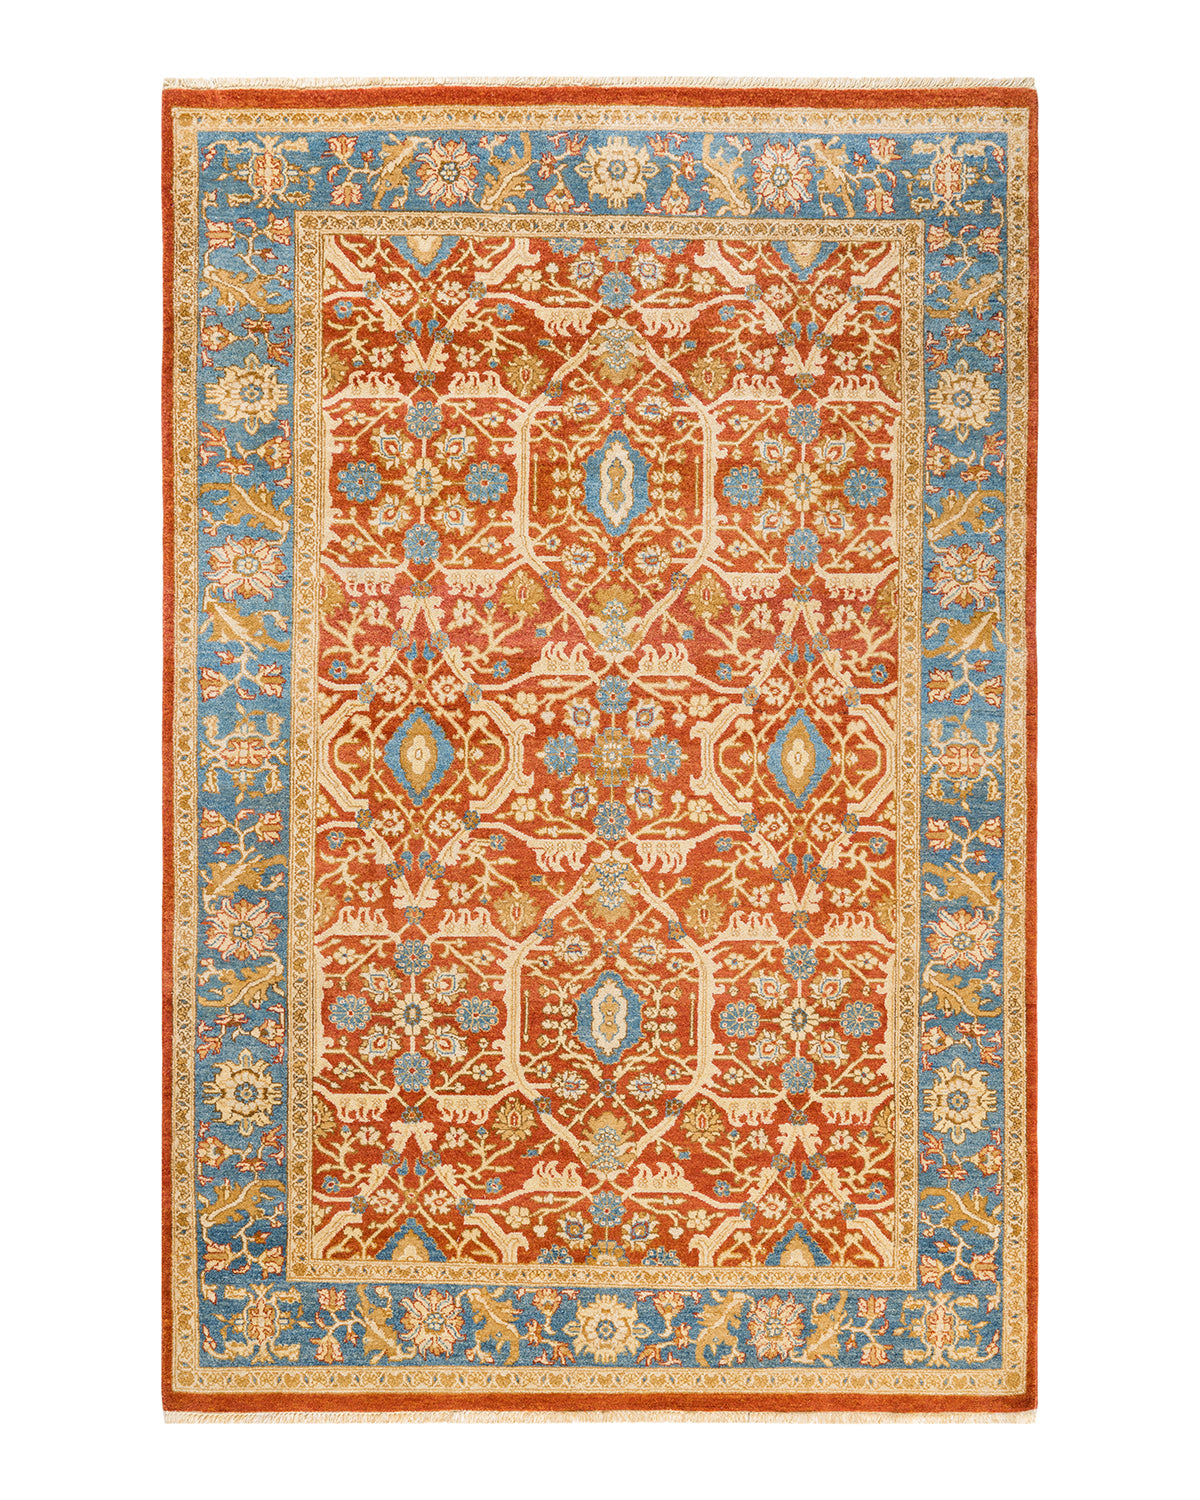 Eclectic, One-of-a-Kind Hand-Knotted Area Rug  - Orange, 6' 0" x 8' 10"